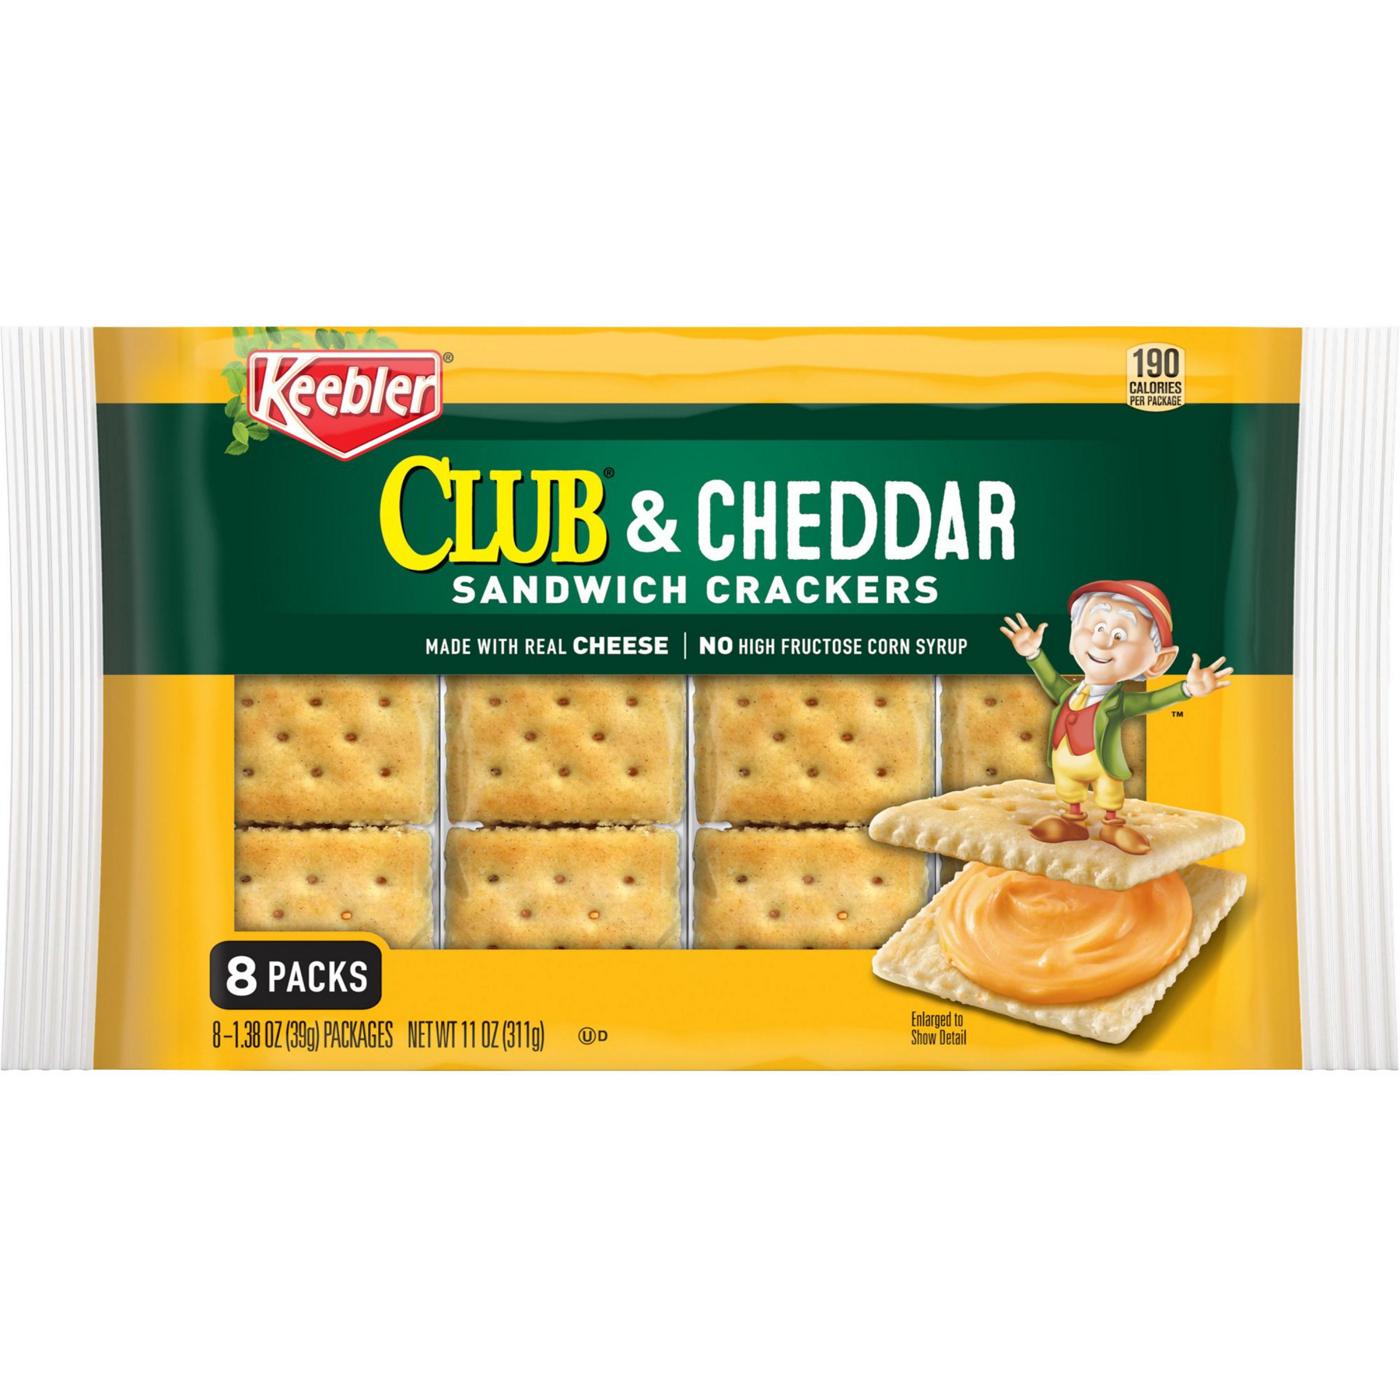 Keebler Club and Cheddar Sandwich Crackers; image 1 of 2